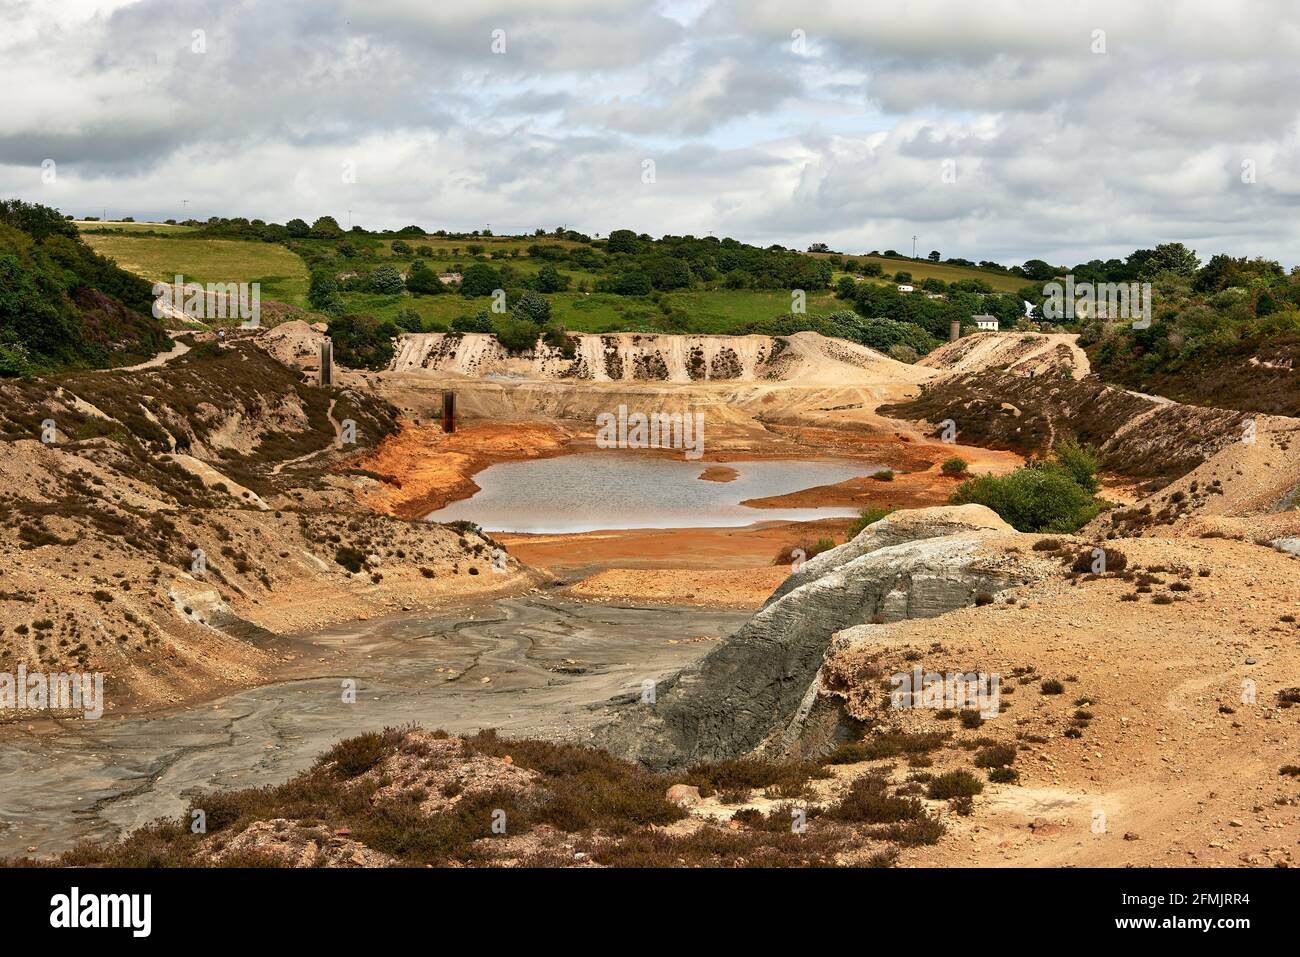 Abandoned copper mine and tailings lagoon at Wheal Maid Valley, St. Day, Cornwall, England, UK Stock Photo